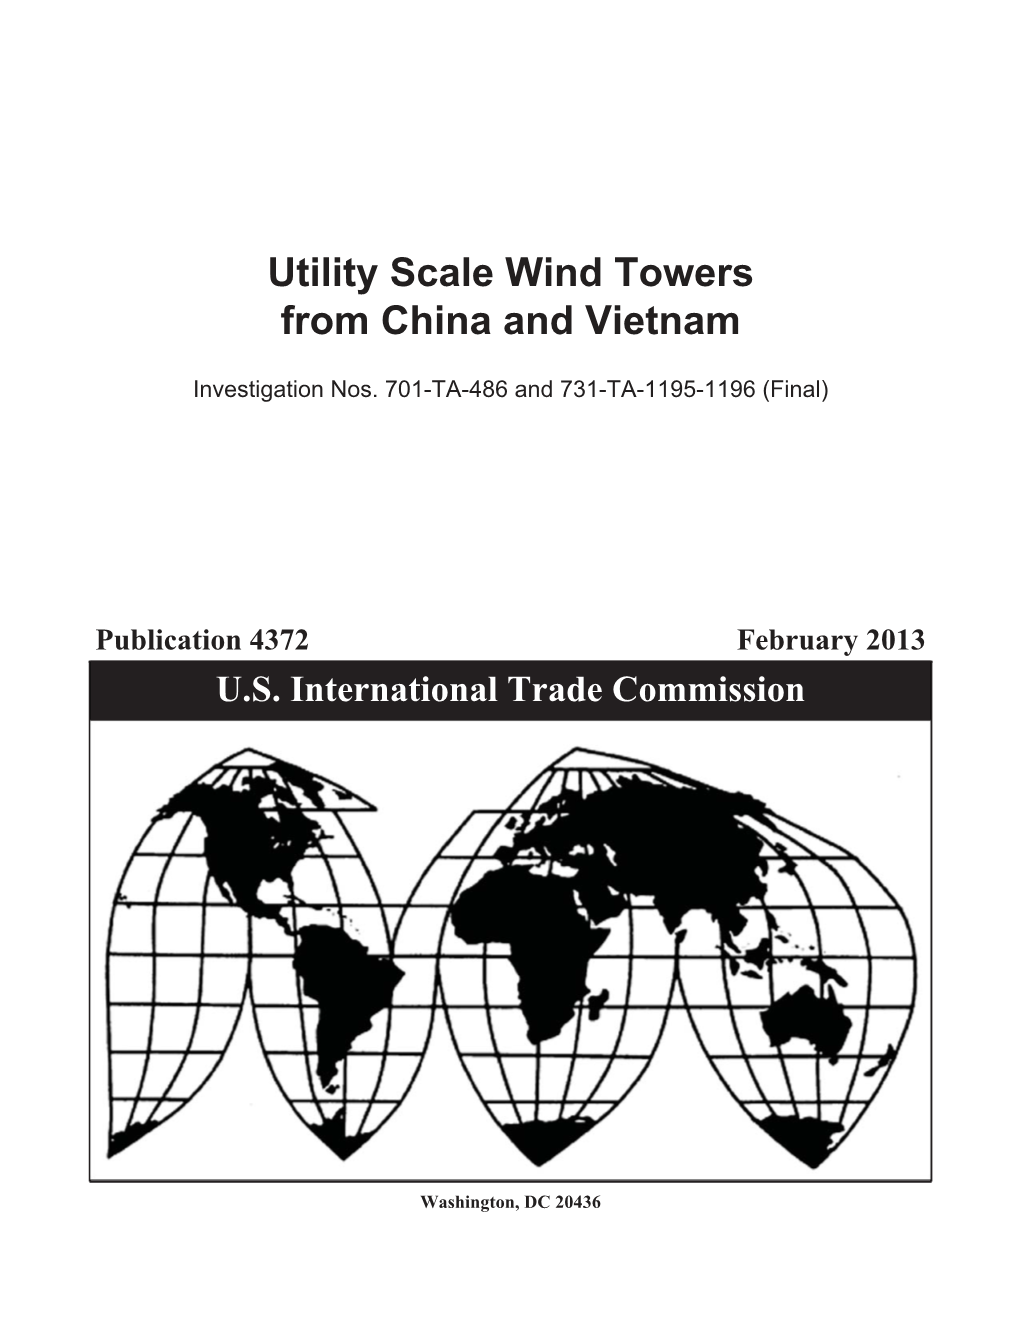 Utility Scale Wind Towers from China and Vietnam